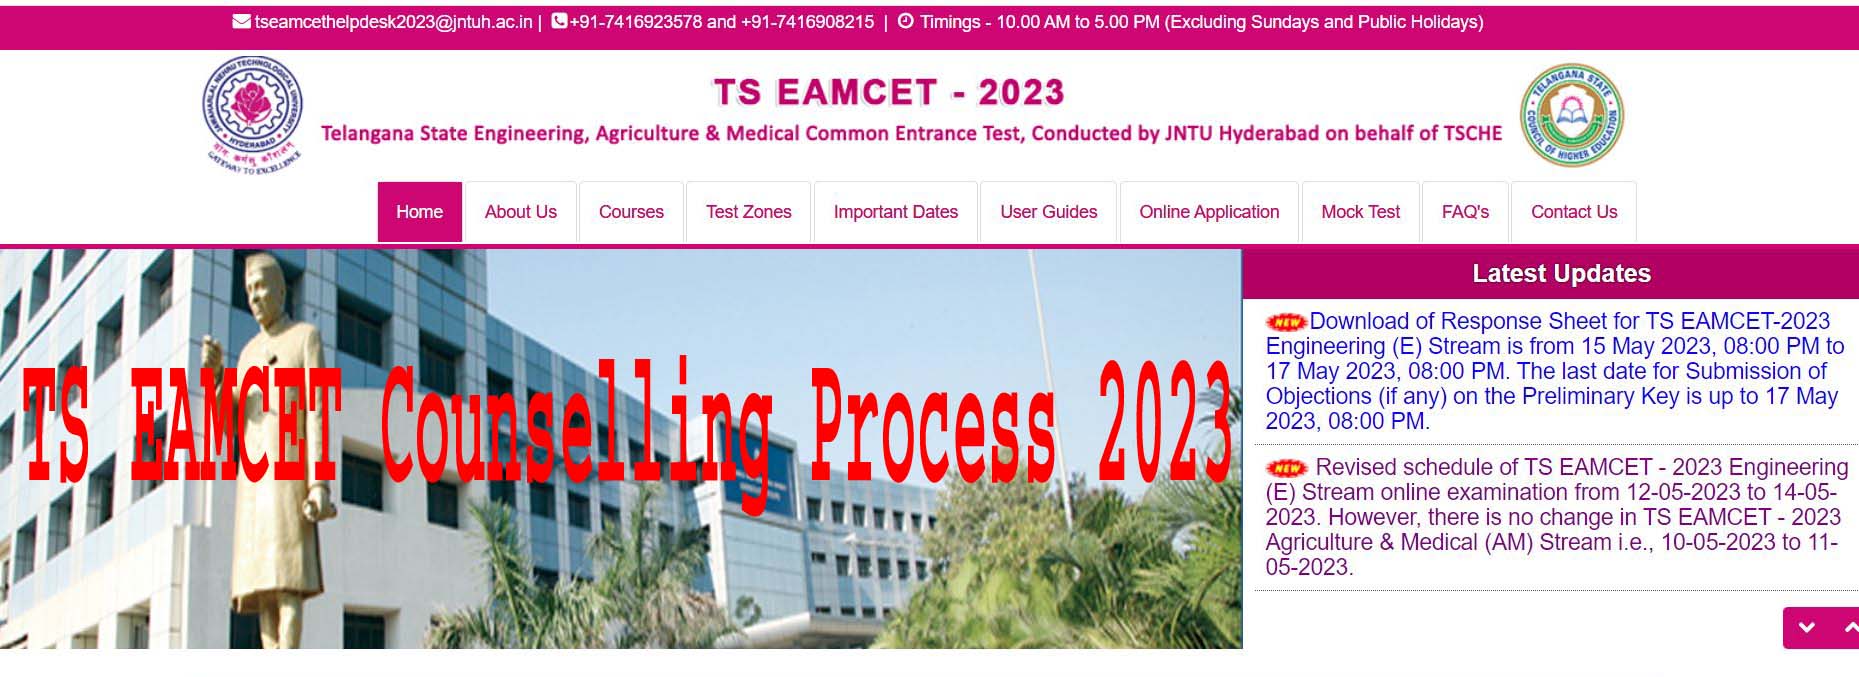 TS EAMCET Counselling Process 2023